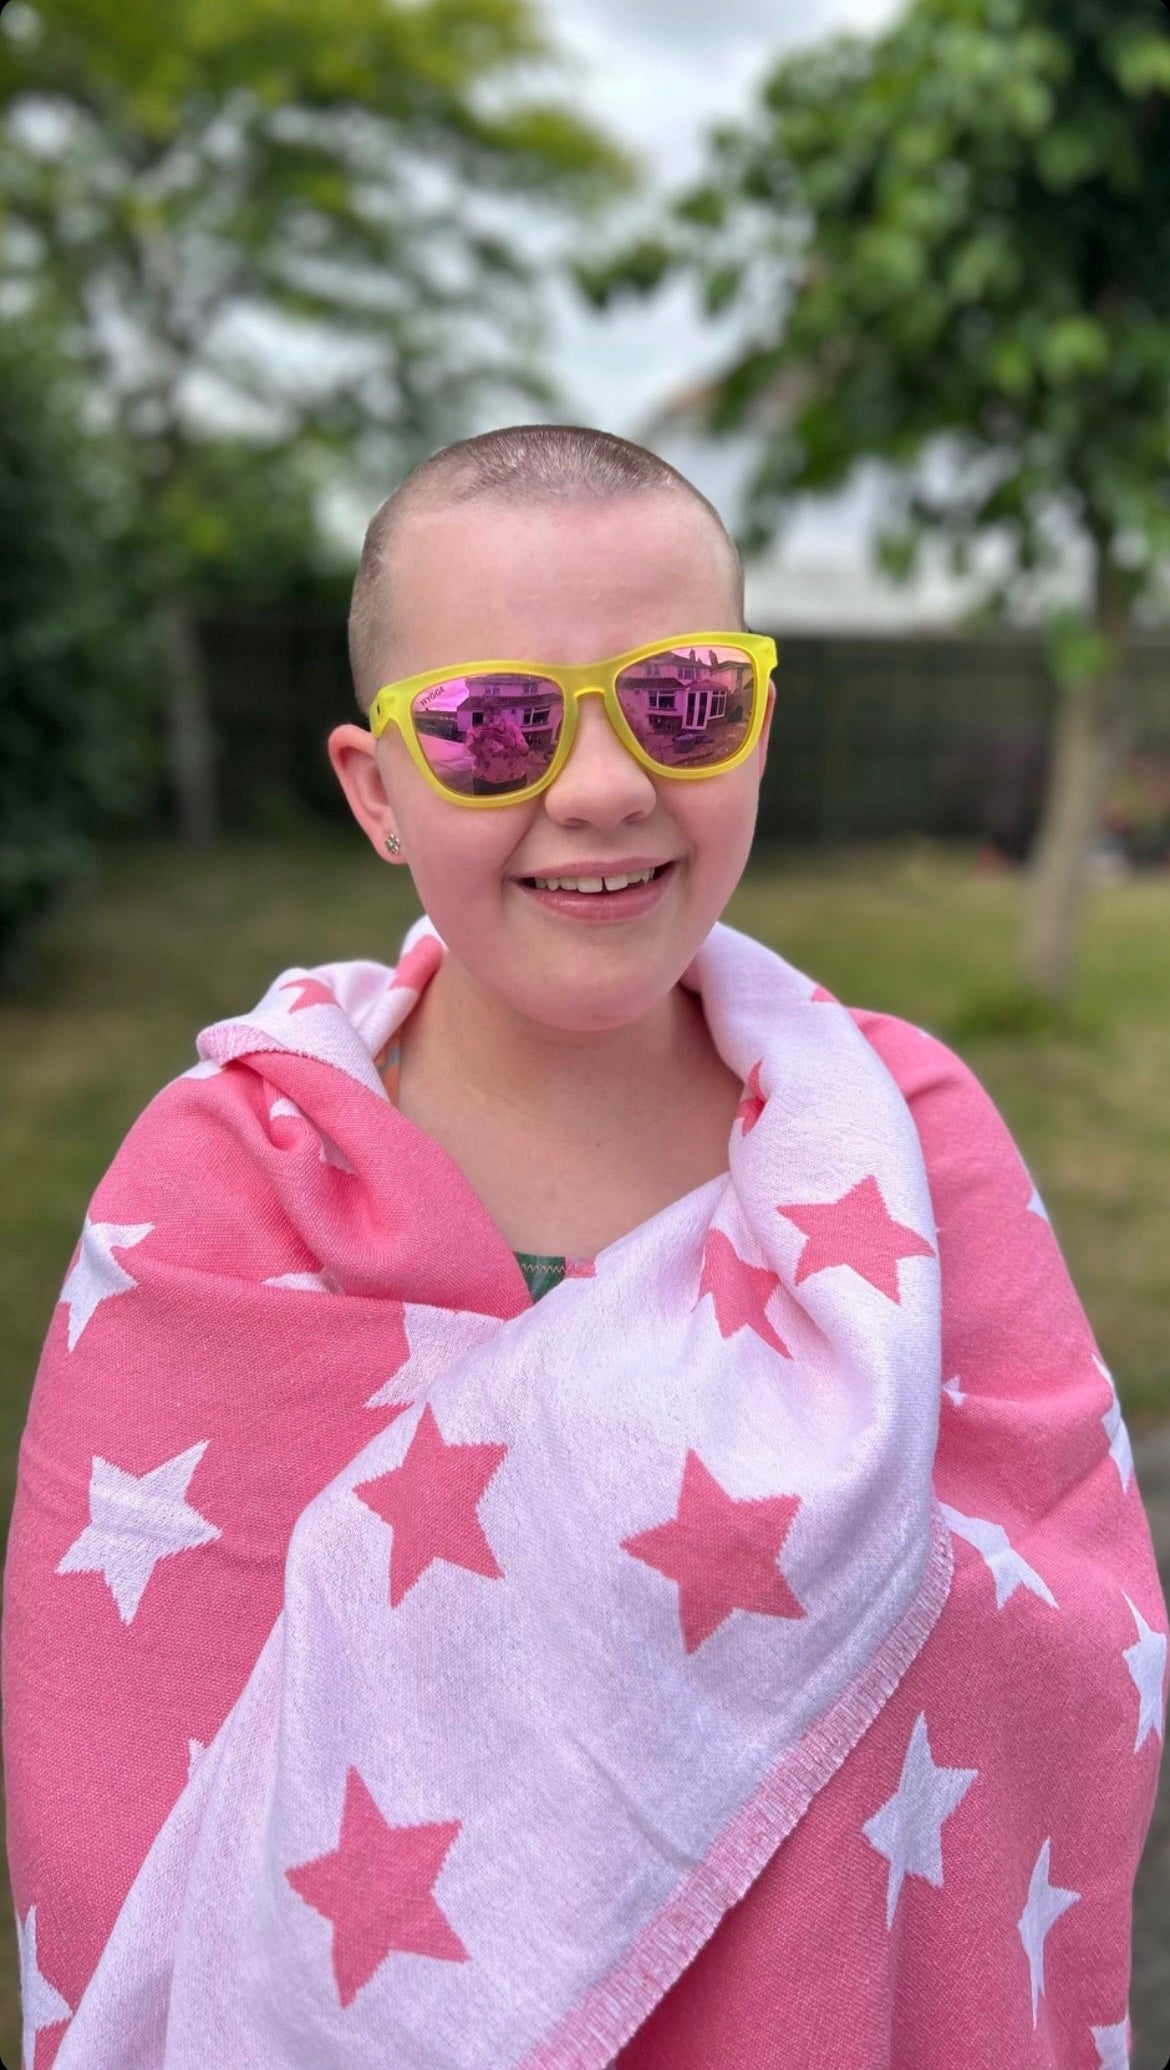 Lovely Tayen is smiling with her pink star towel wrapped round her and her yellow and purple pretty sunglasses